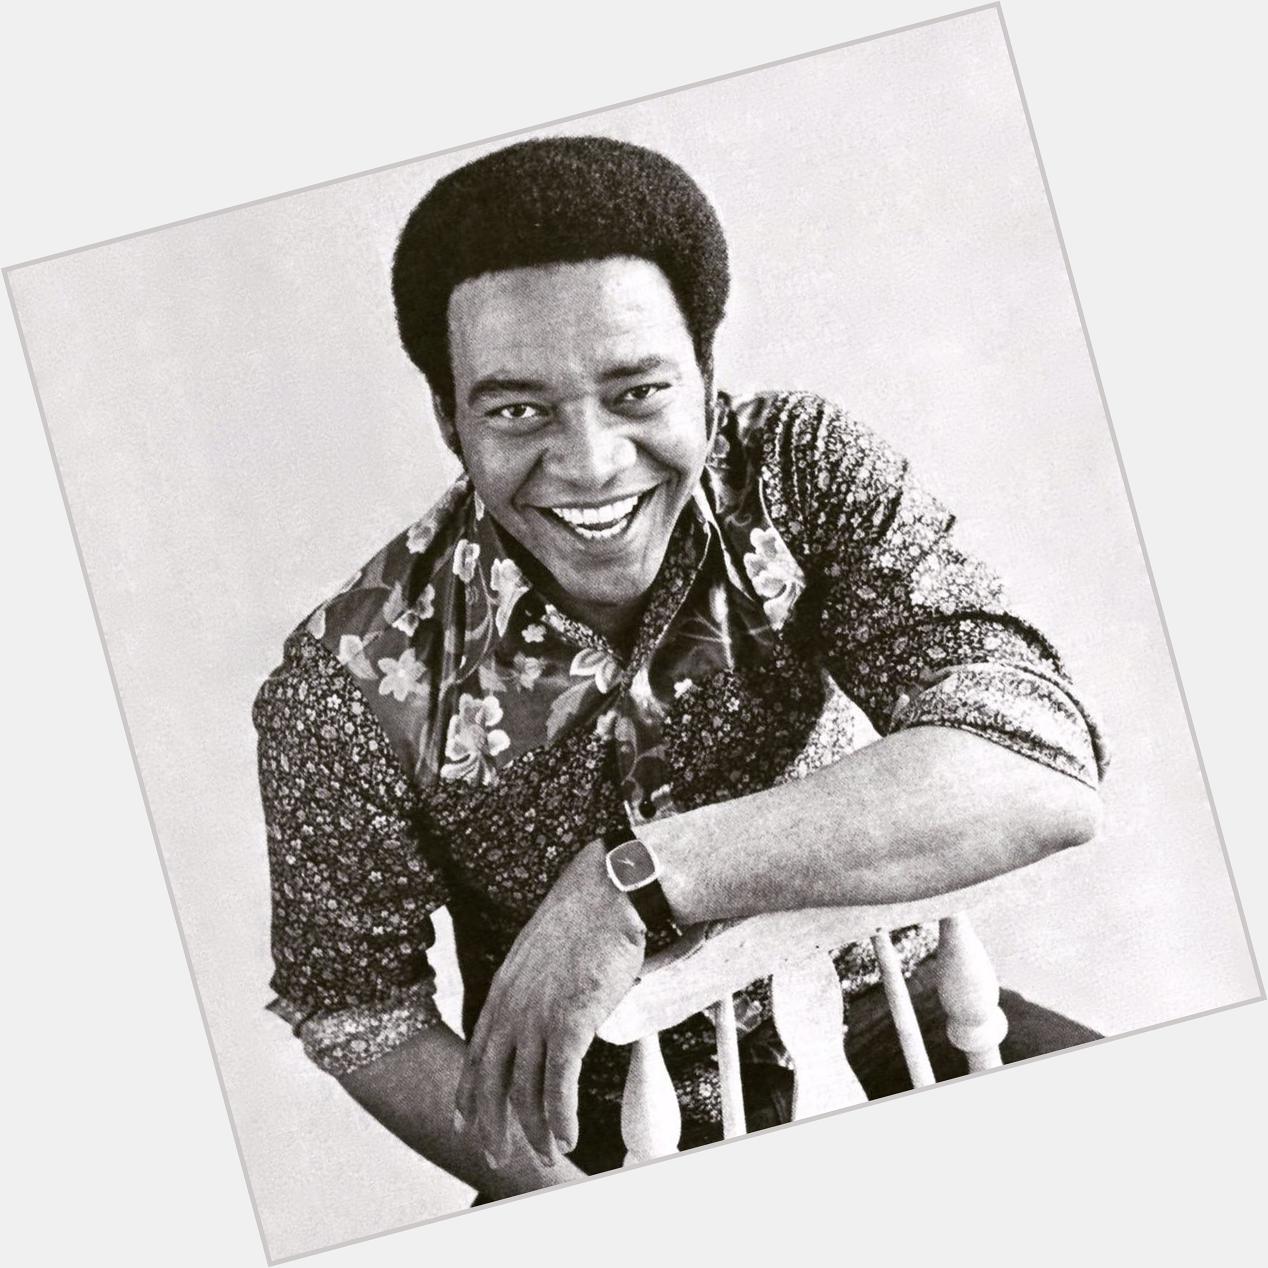 Instead of wishing america happy birthday, i choose to wish bill withers a happy birthday. 